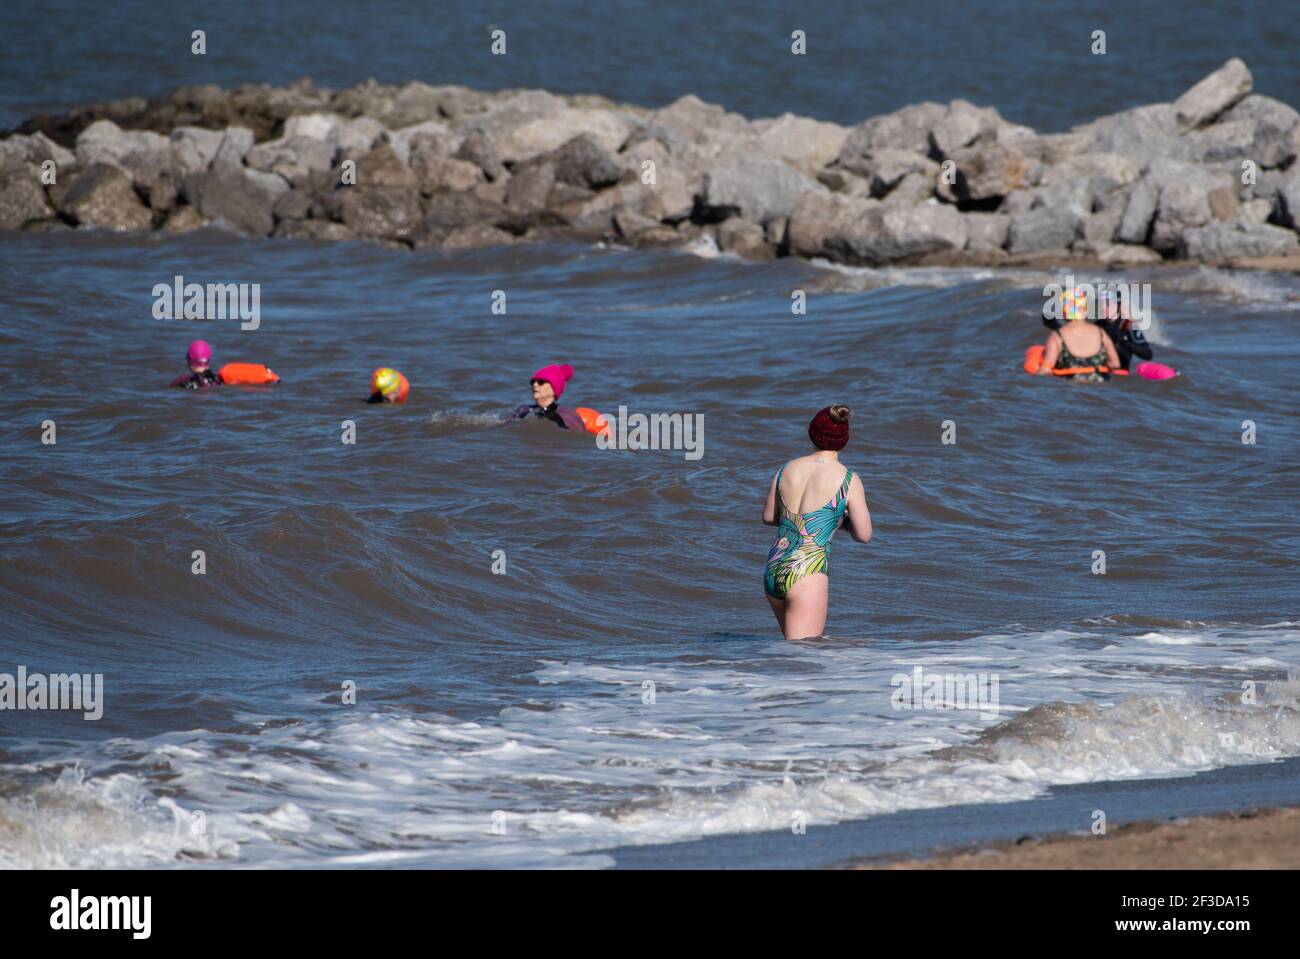 Morecambe, Lancashire, UK. 16th Mar, 2021. Members of open water swimming group MALLOWS (Morecambe and Lancaster Lancashire Open Water Swimming) enjoying the waters of Morecambe Bay at Morecambe, Lancashire. The group has grown from one member in 2017 to 2,900 members now enjoying a refreshing swim as an antidote to the pressures of the pandemic. Credit: John Eveson/Alamy Live News Stock Photo